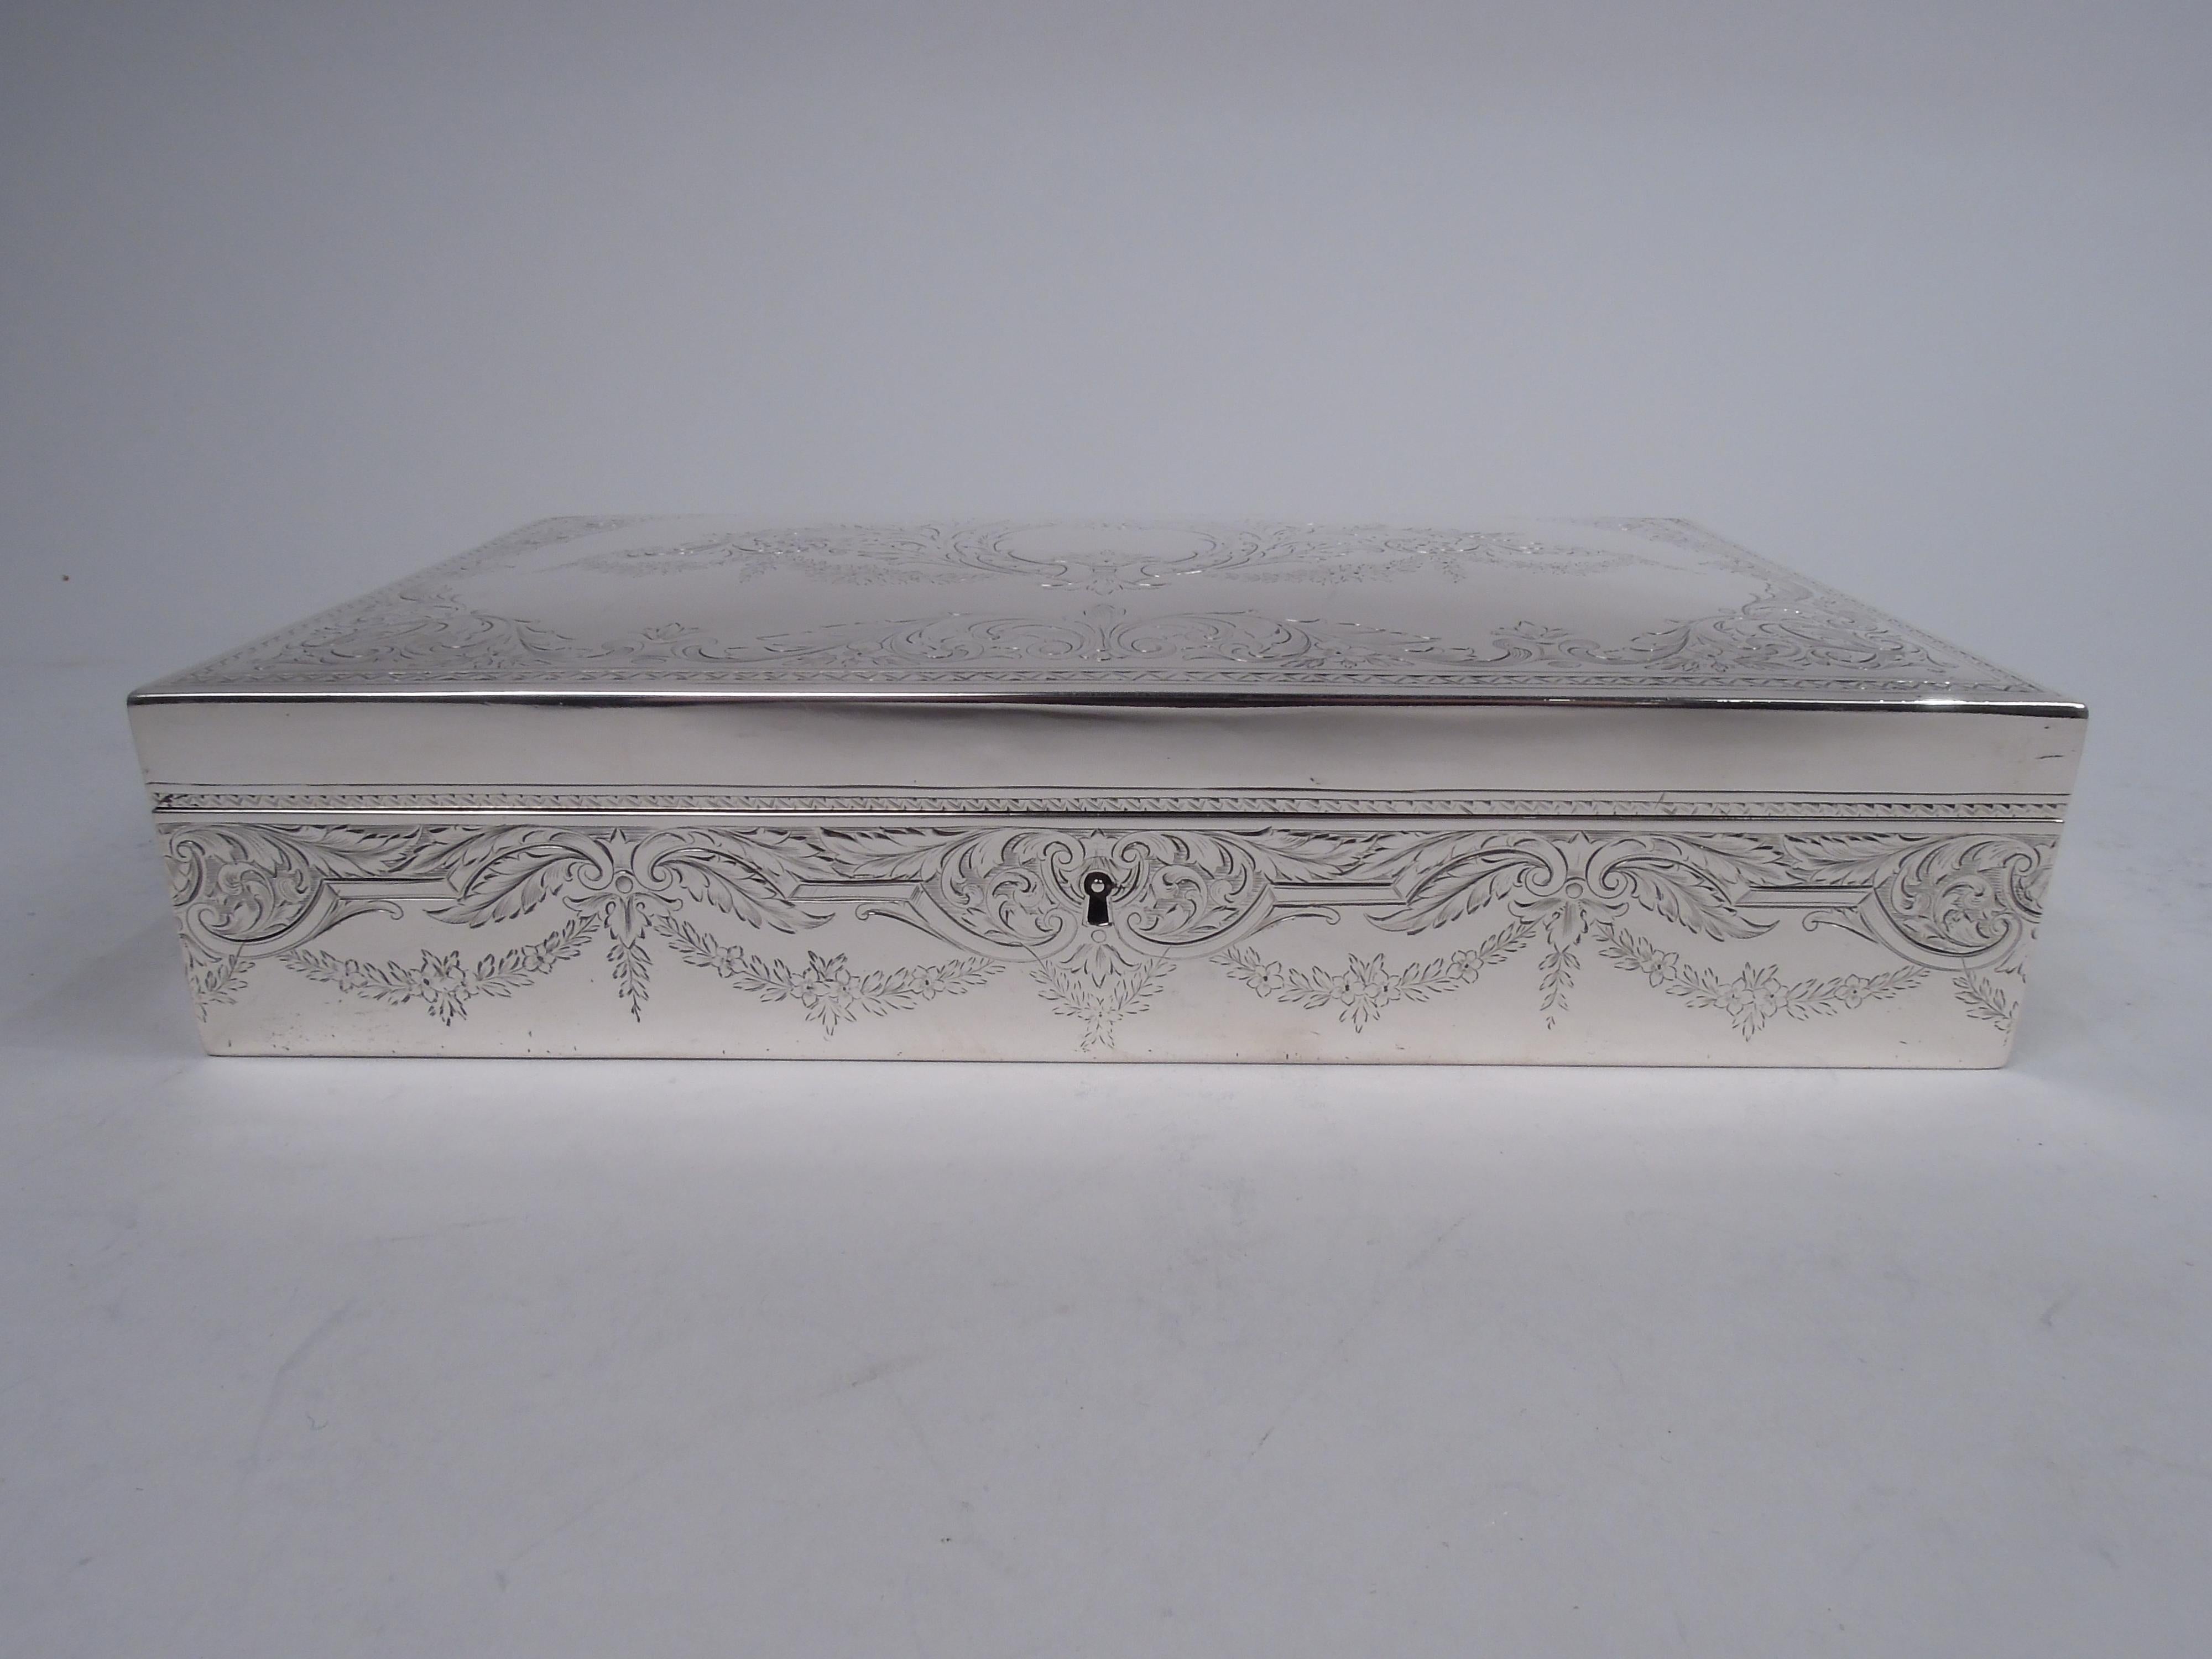 Edwardian Classical sterling silver humidor. Made by William B. Durgin Co. (part of Gorham) in Concord, ca 1910. Rectangular with straight sides; cover hinged with gently curved top. Engraved leafing scrollwork with pendant garlands. On cover top